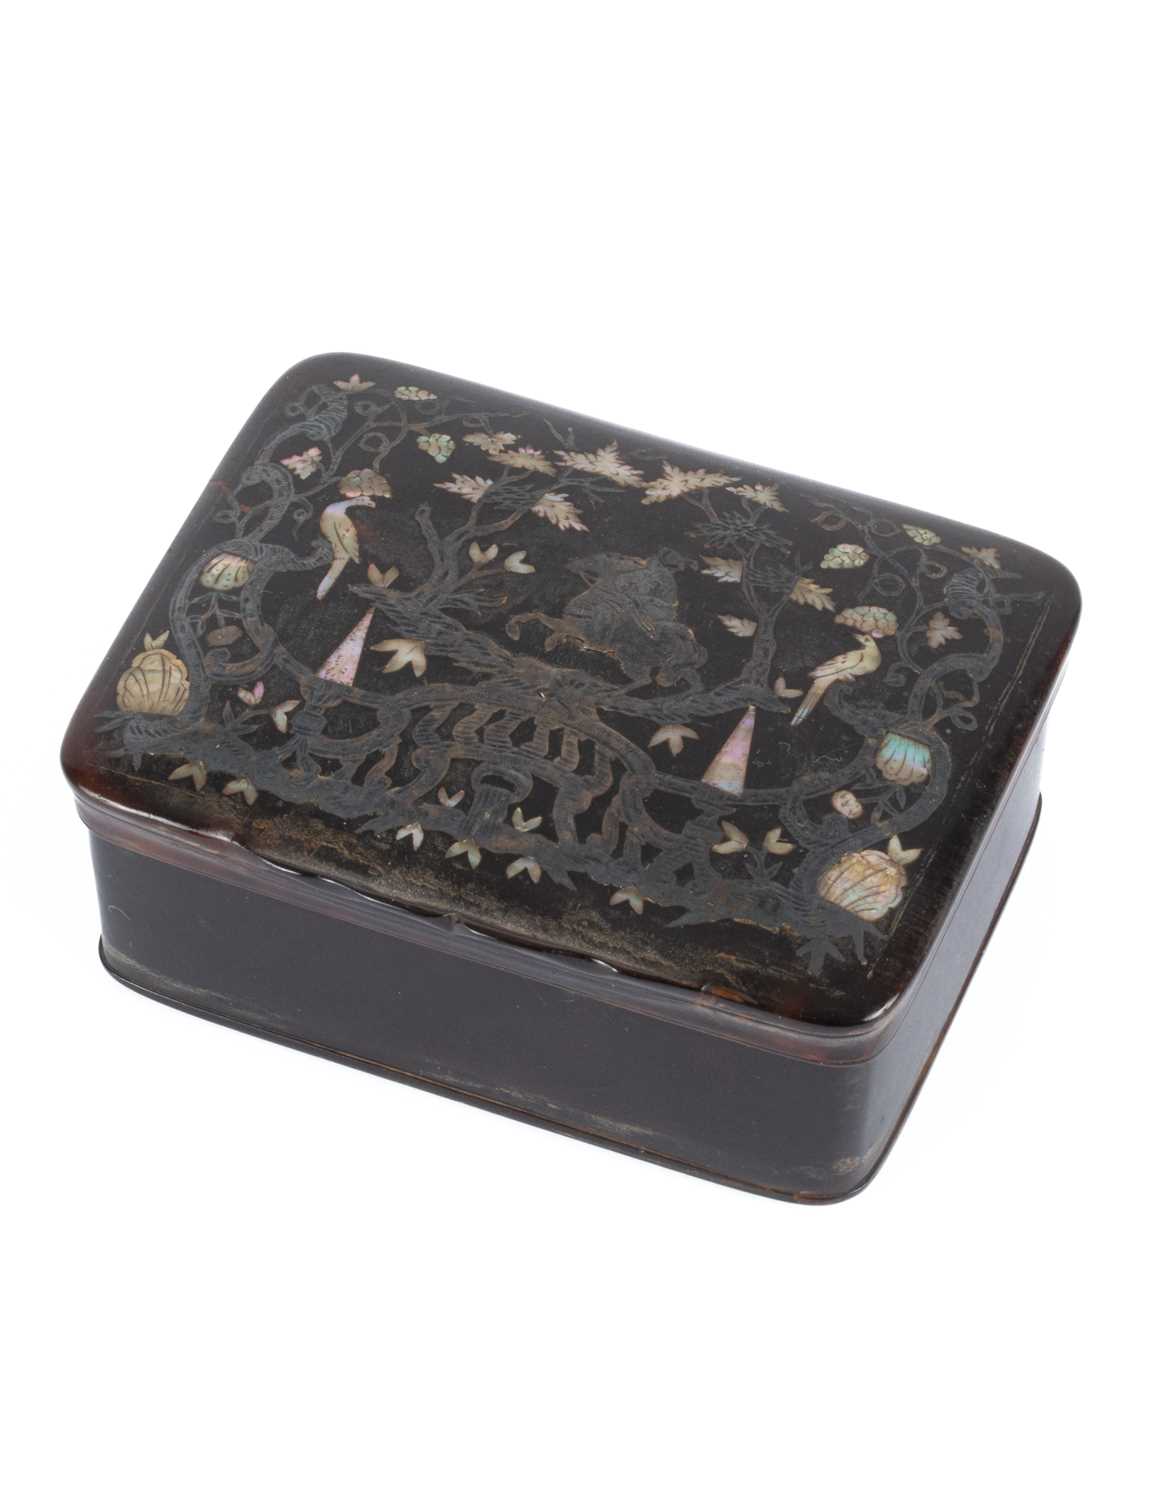 A George III silver and mother-of-pearl inlaid tortoiseshell snuff box - Image 4 of 6